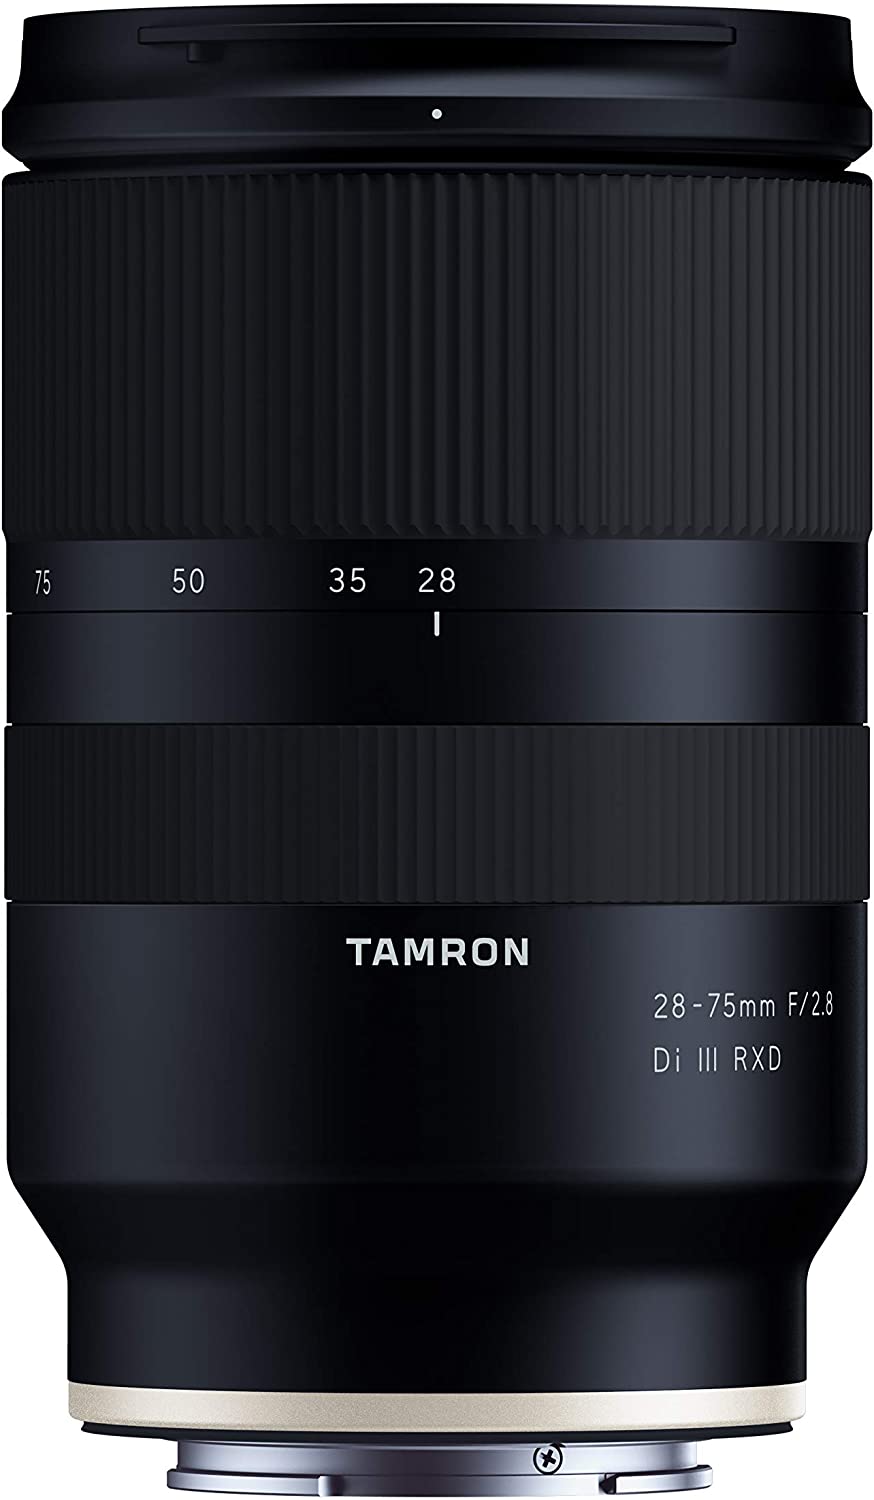 Tamron 28-75mm F / 2.8 Di III RXD for Sony E mount (Model A036